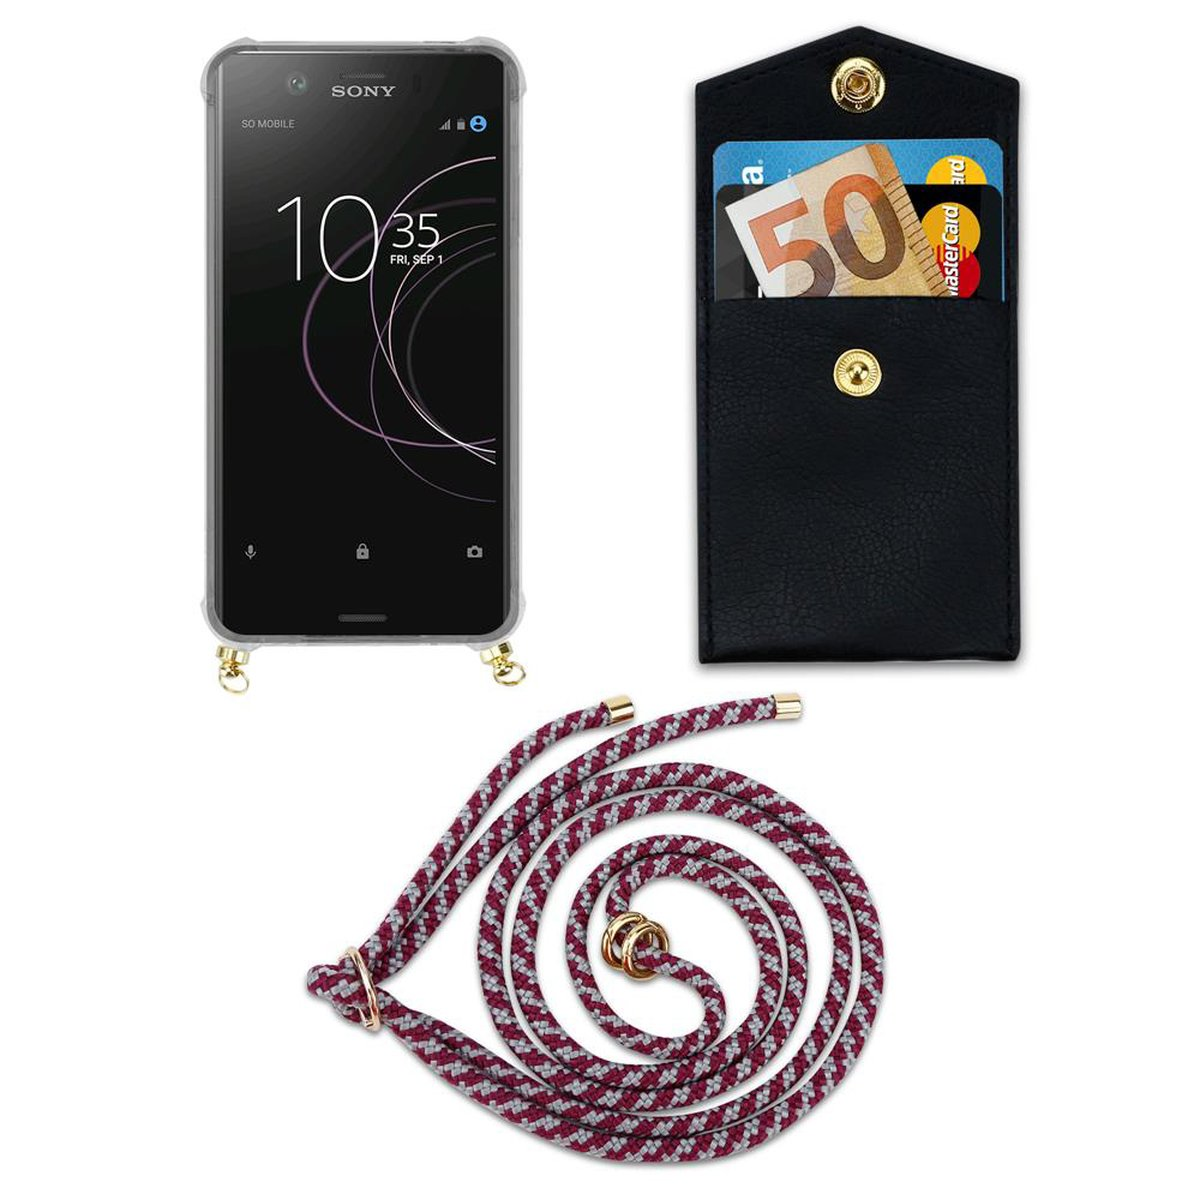 Xperia mit Kordel XZ1 COMPACT, WEIß Gold ROT Ringen, Band CADORABO Hülle, Kette Handy Sony, Backcover, abnehmbarer und